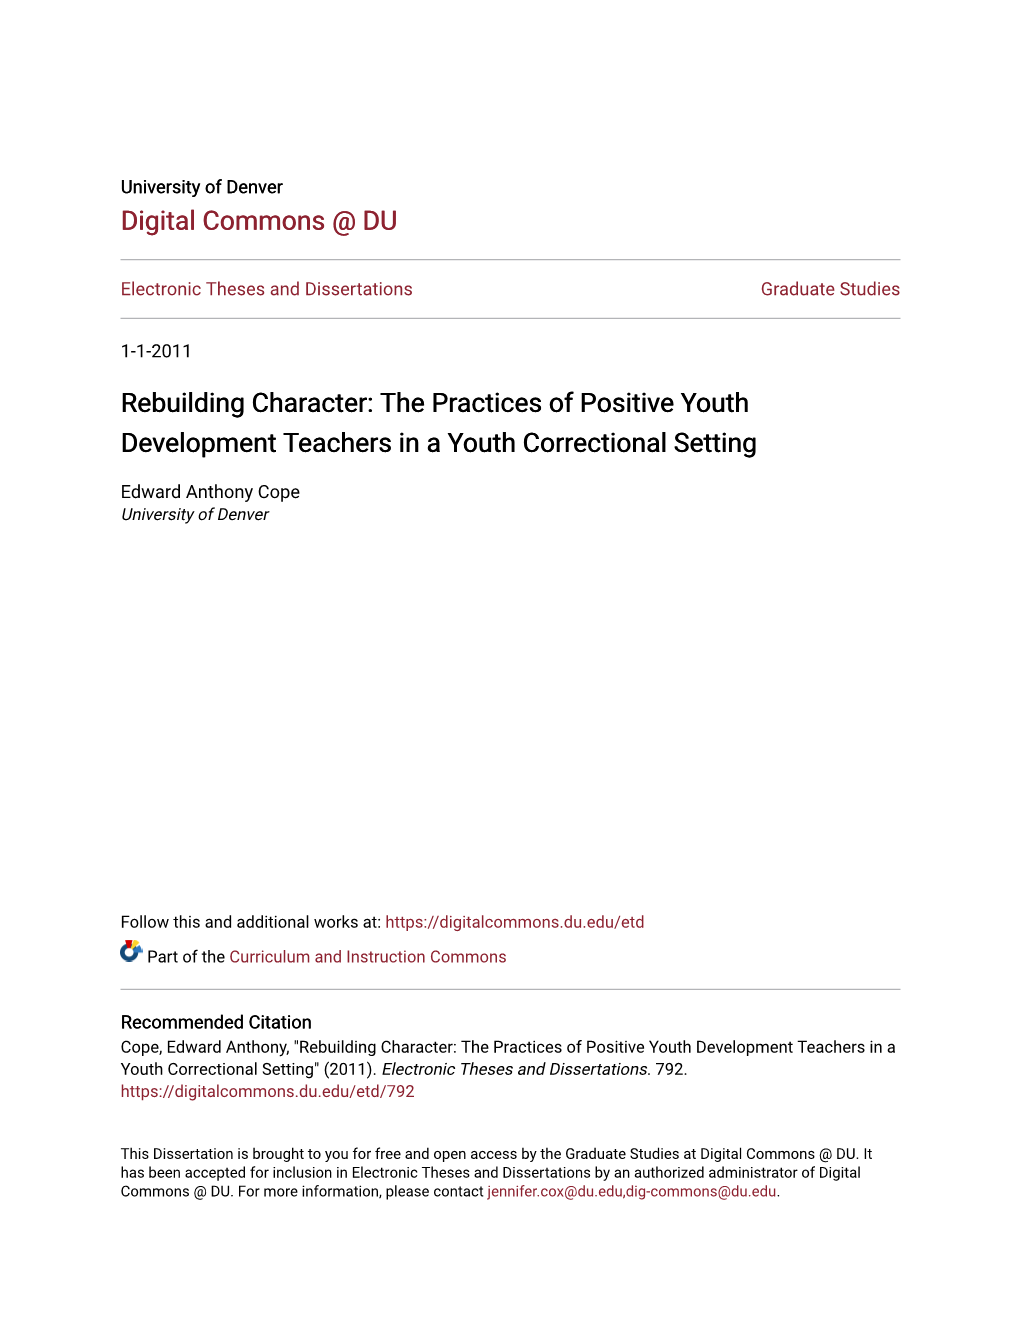 The Practices of Positive Youth Development Teachers in a Youth Correctional Setting